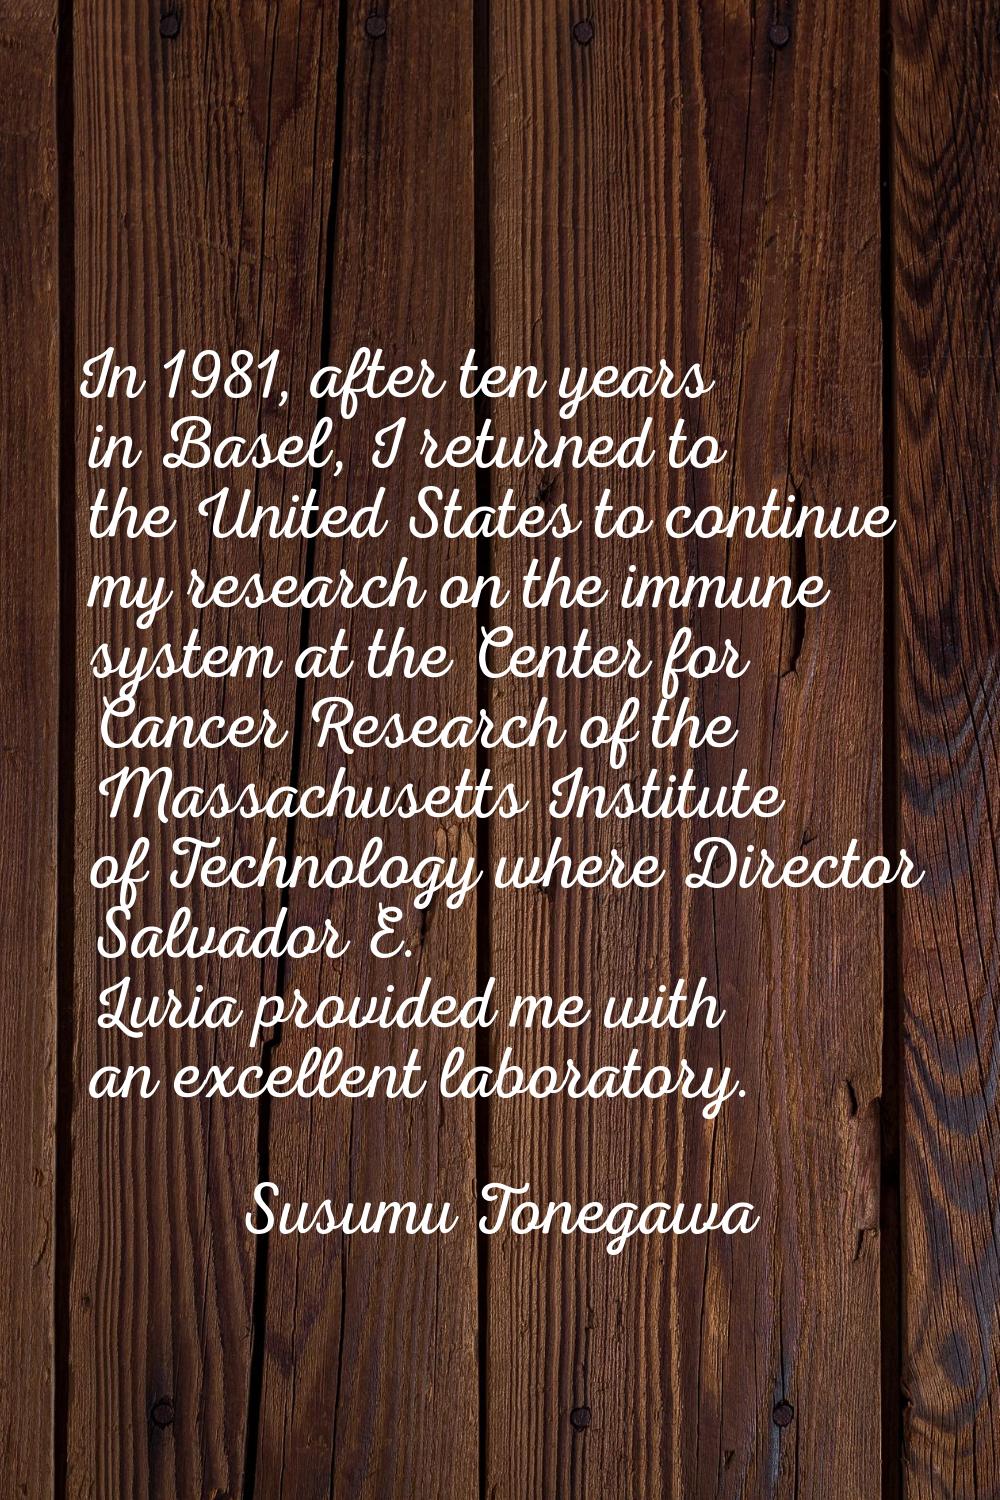 In 1981, after ten years in Basel, I returned to the United States to continue my research on the i